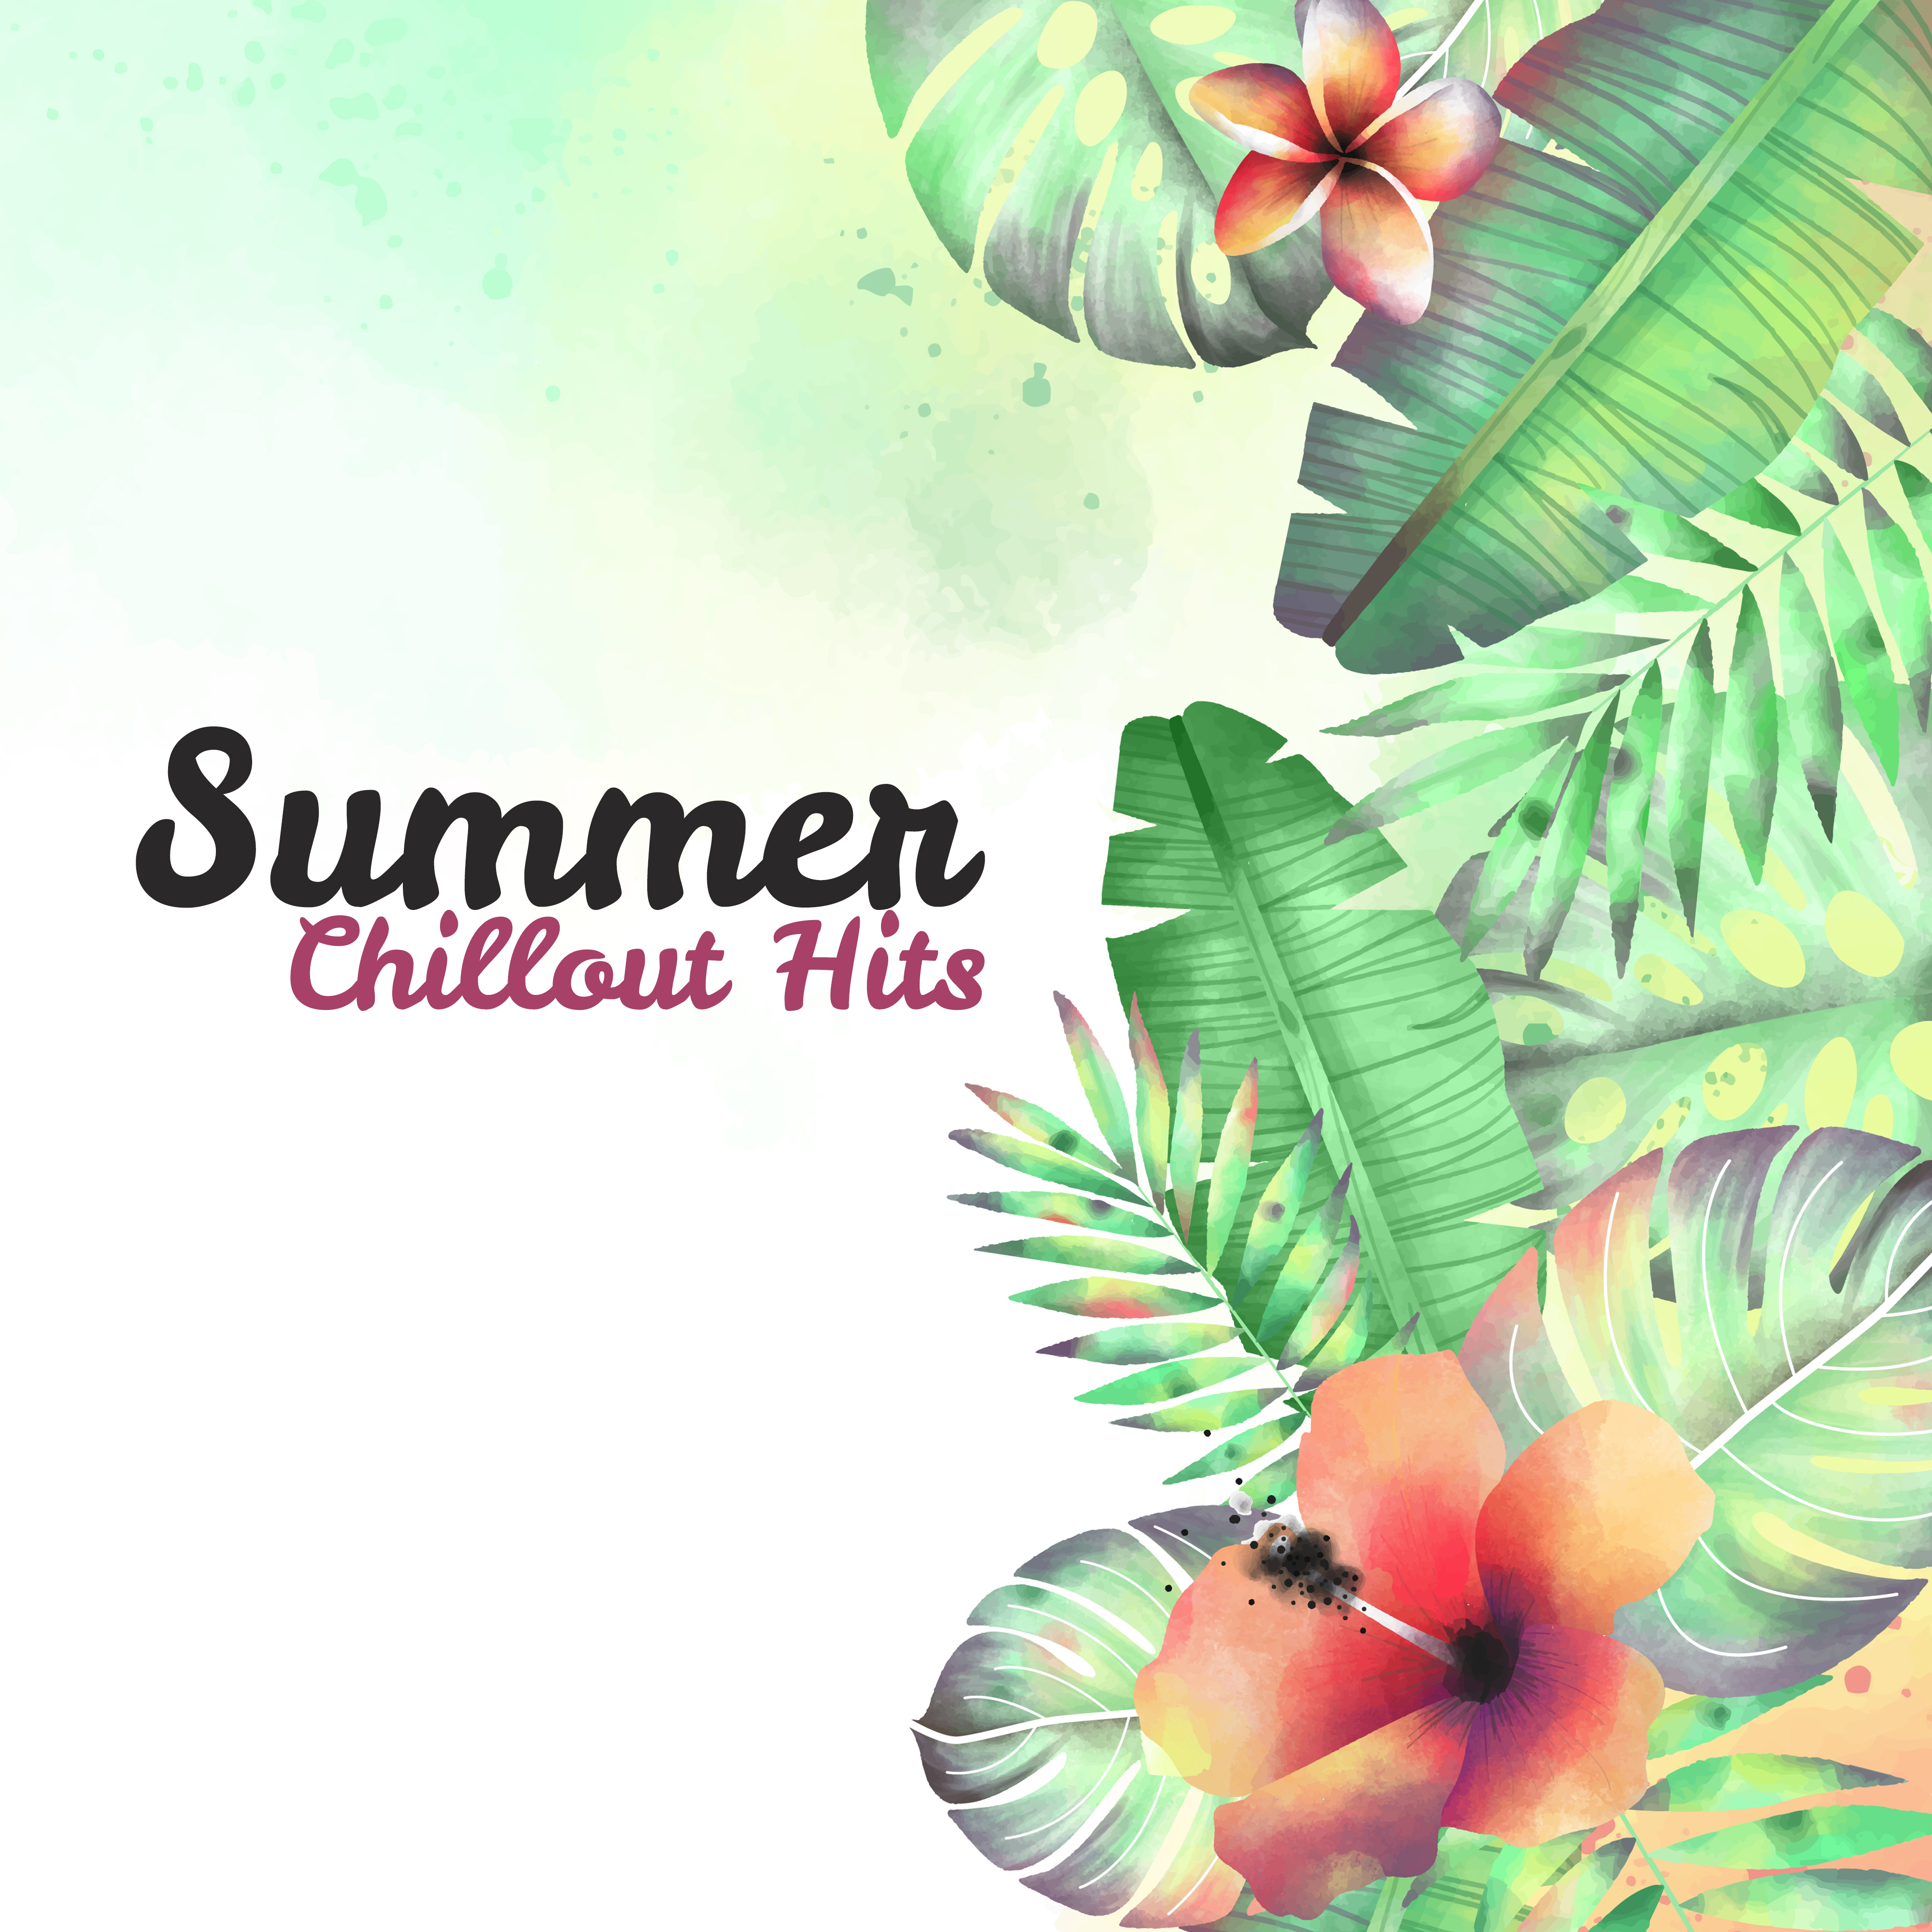 Summer Chillout Hits